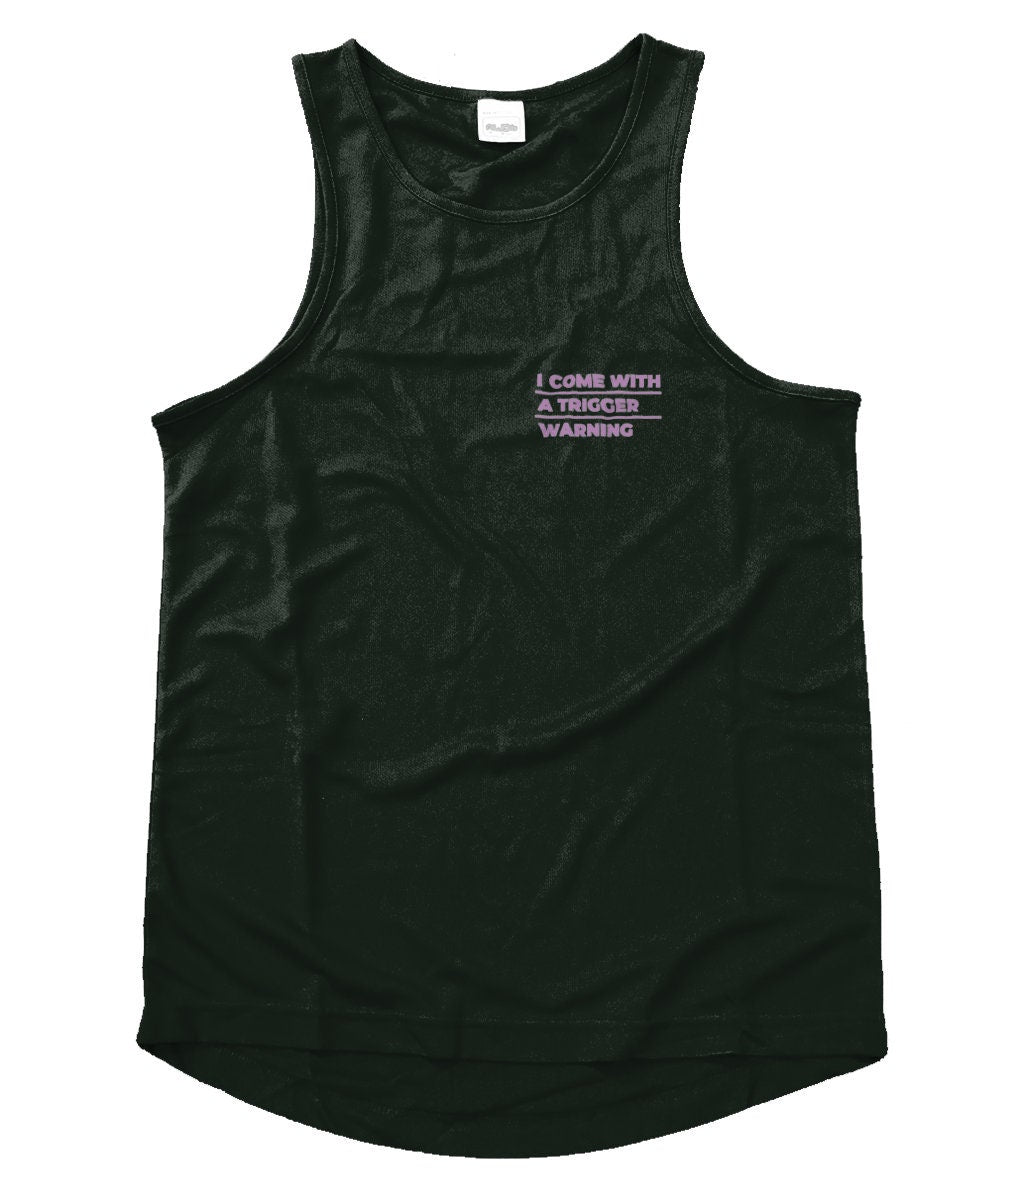 I Come With a Trigger Warning, Purple, Men's Cool Vest